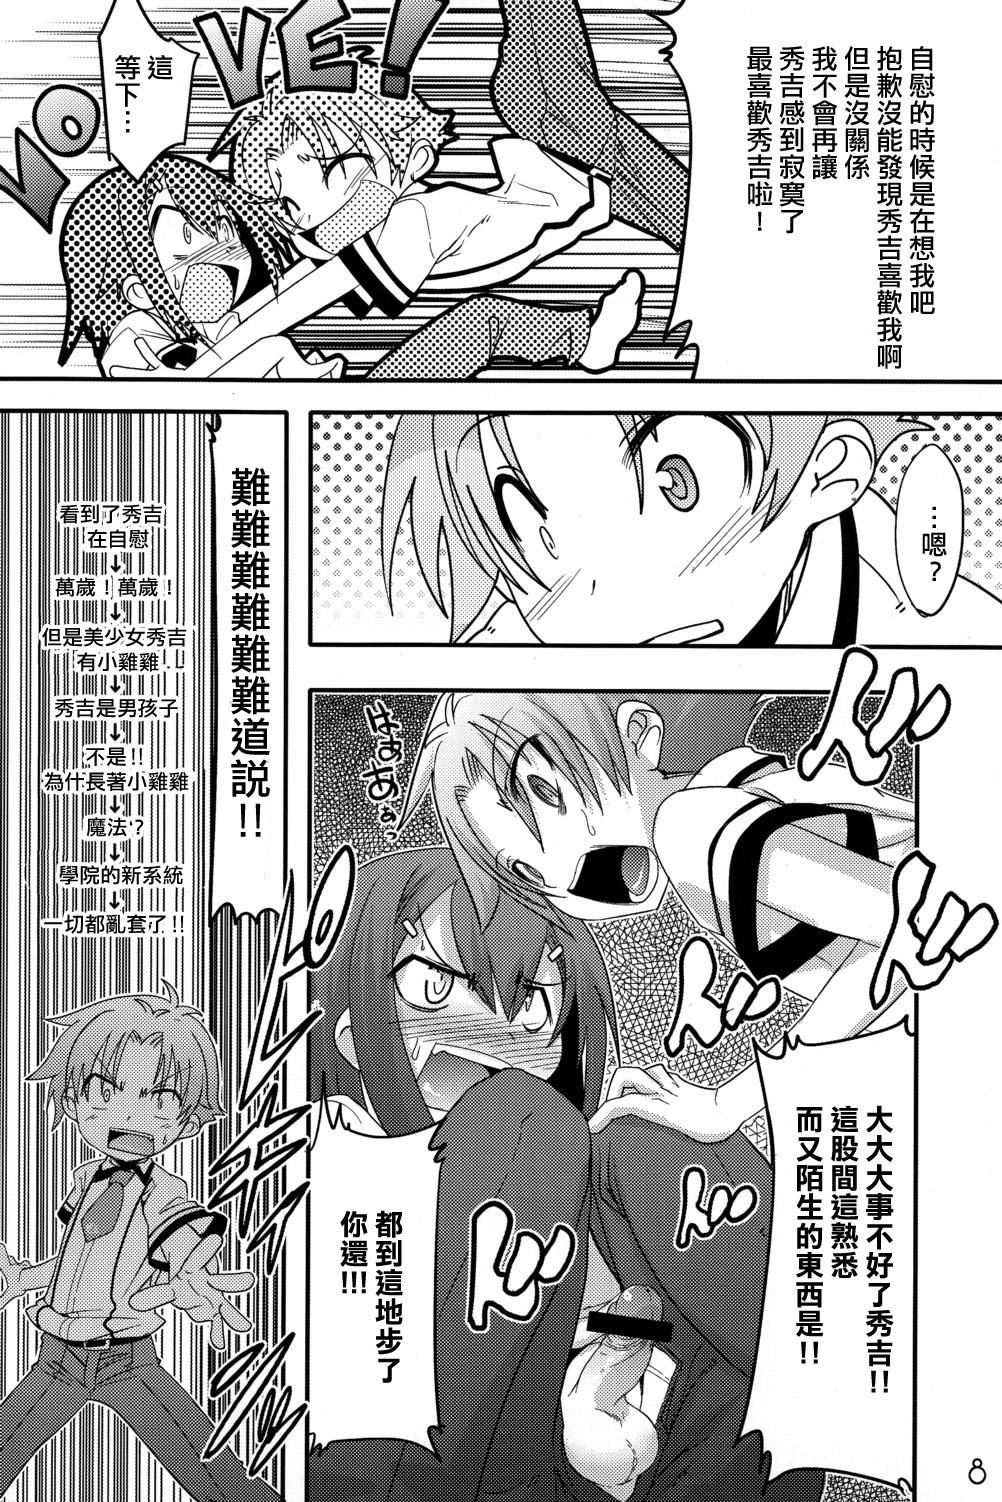 Russian Fortune Favours Fools - Baka to test to shoukanjuu Tamil - Page 7